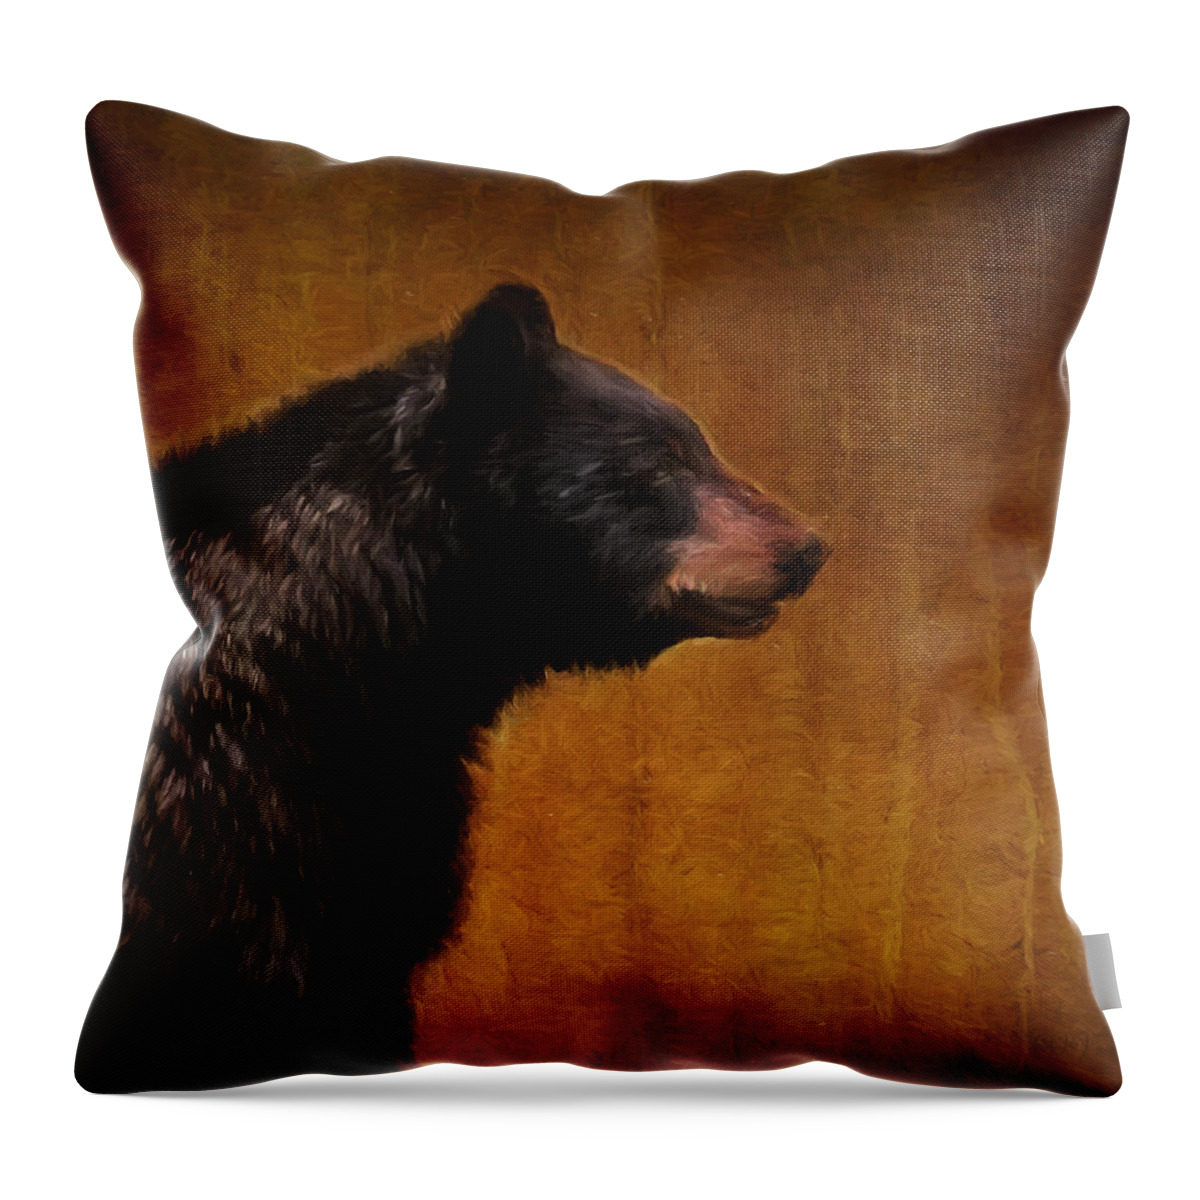 Black Bear Throw Pillow featuring the photograph Black Bear Portrait Painterly by Clare VanderVeen